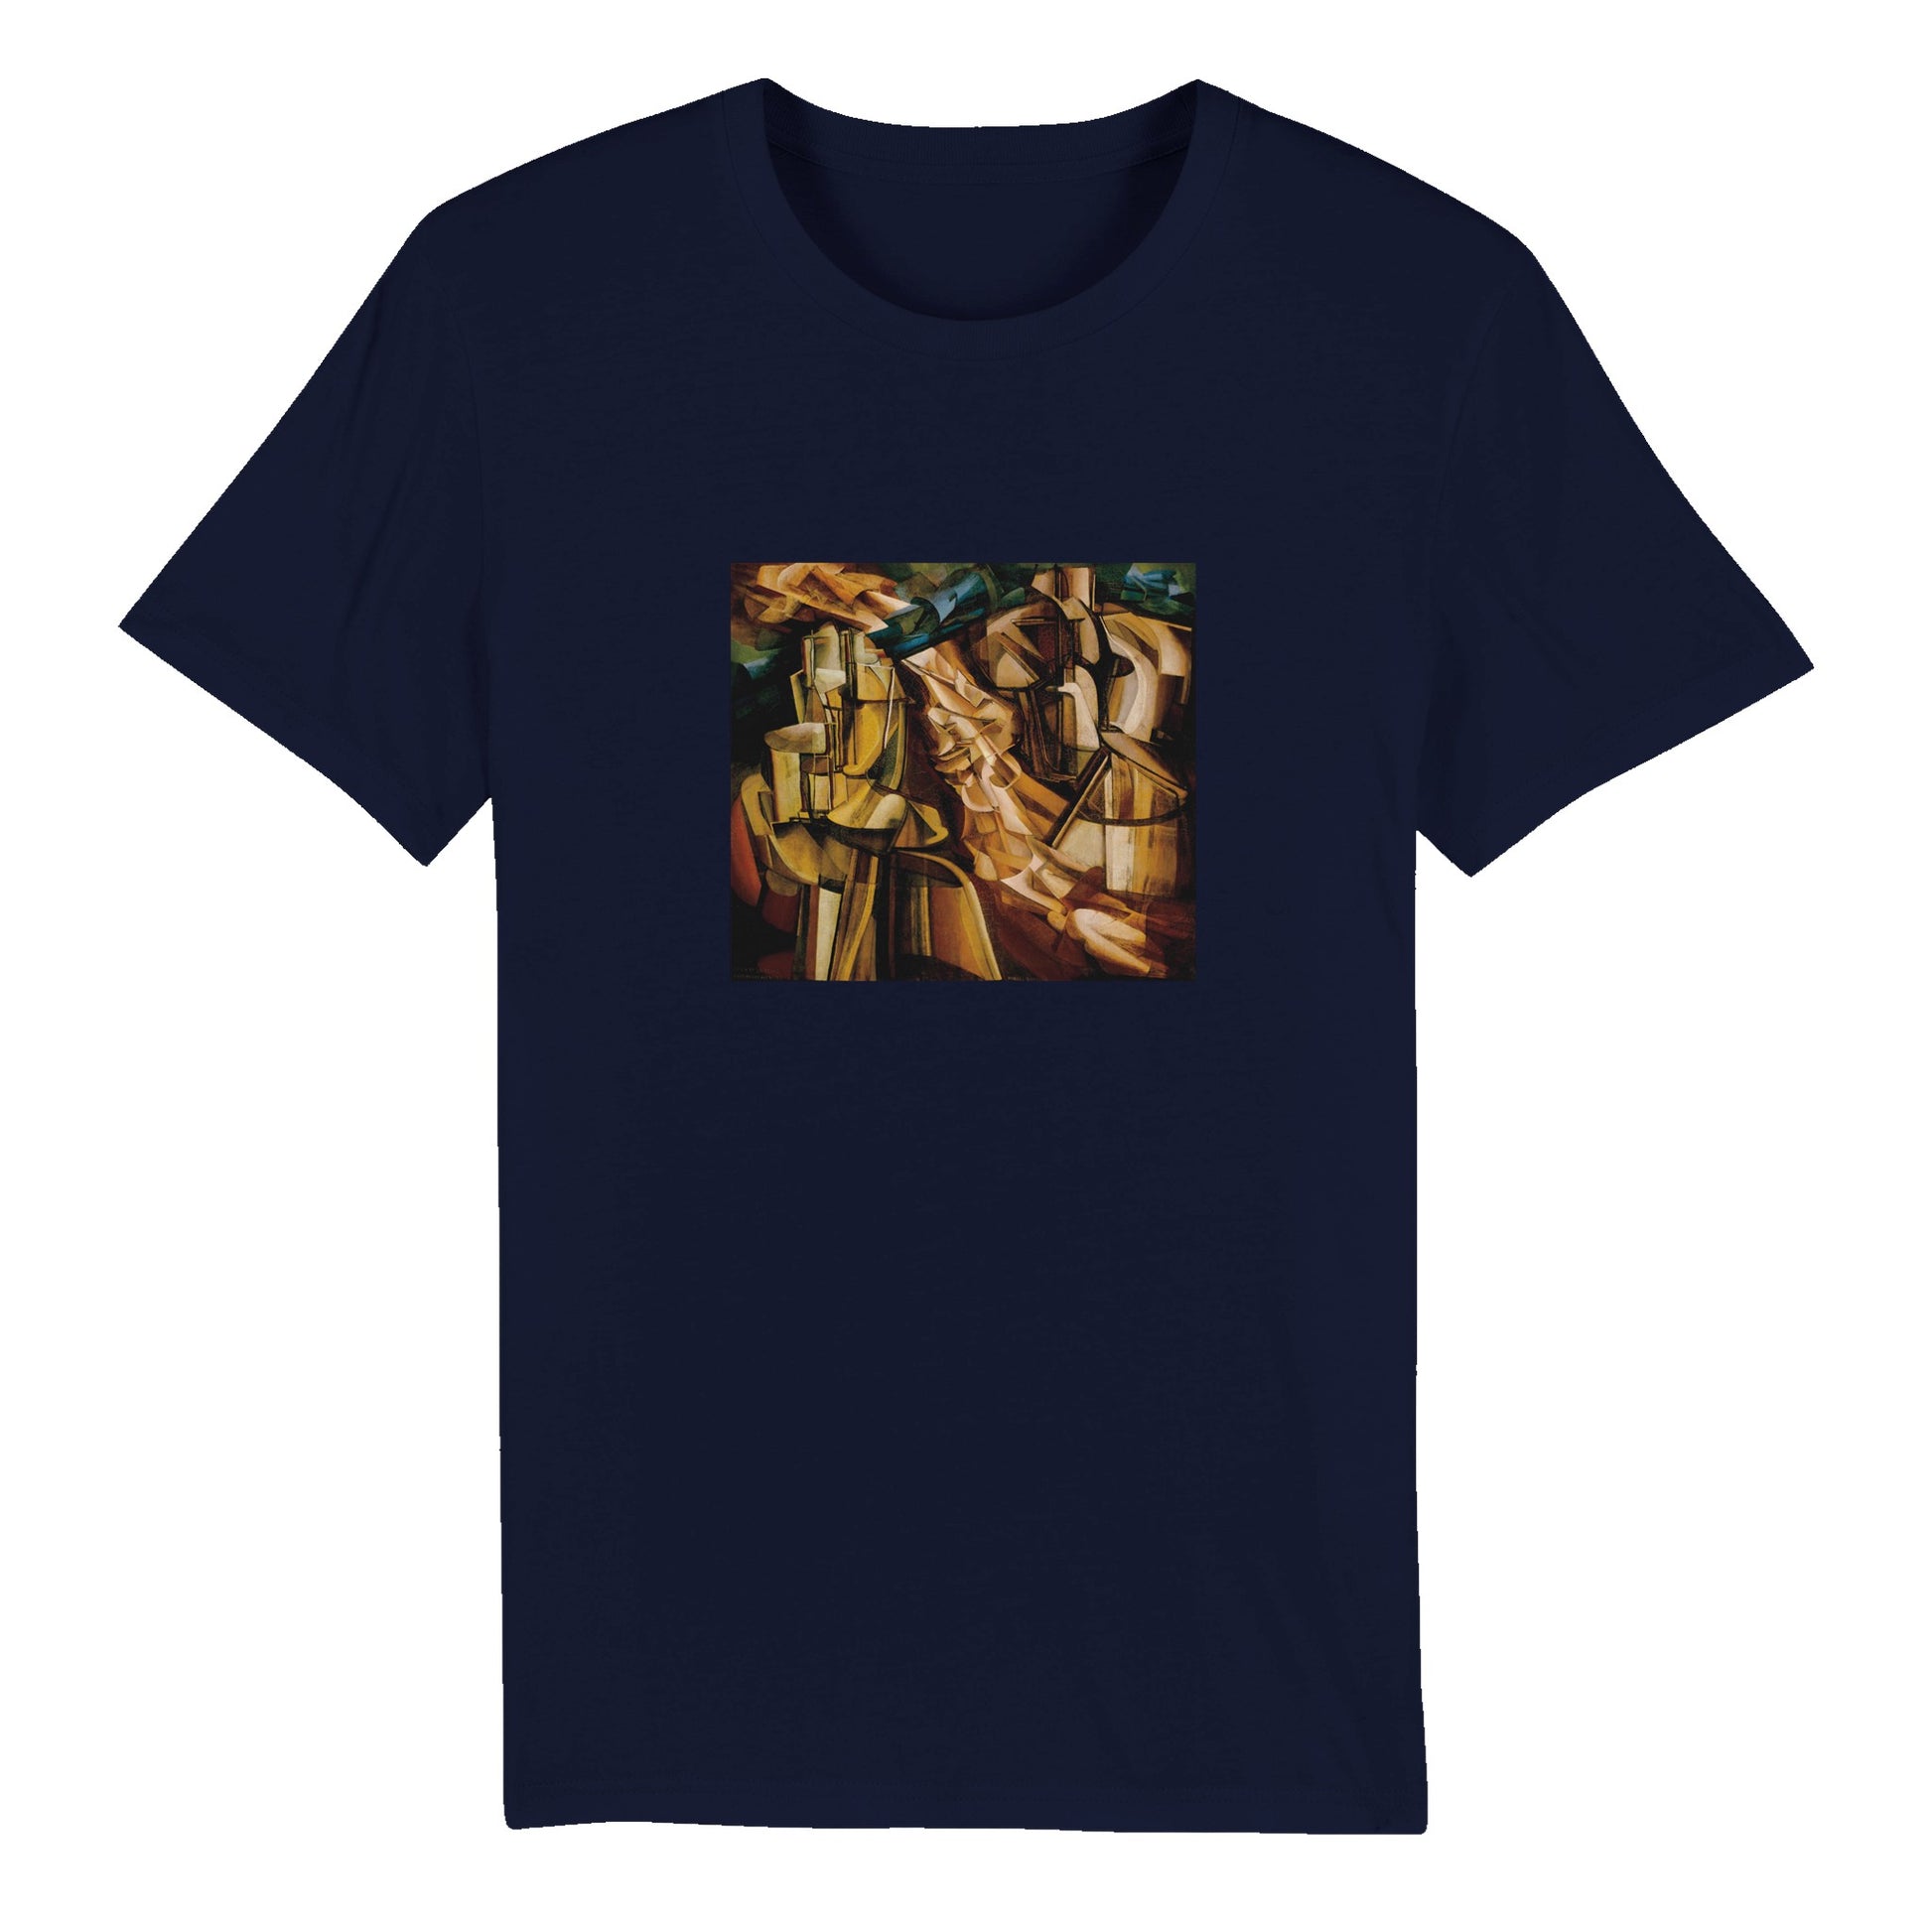  MARCEL DUCHAMP - THE KING AND QUEEN SURROUNDED BY SWIFT NUDES - ORGANIC UNISEX T-SHIRT